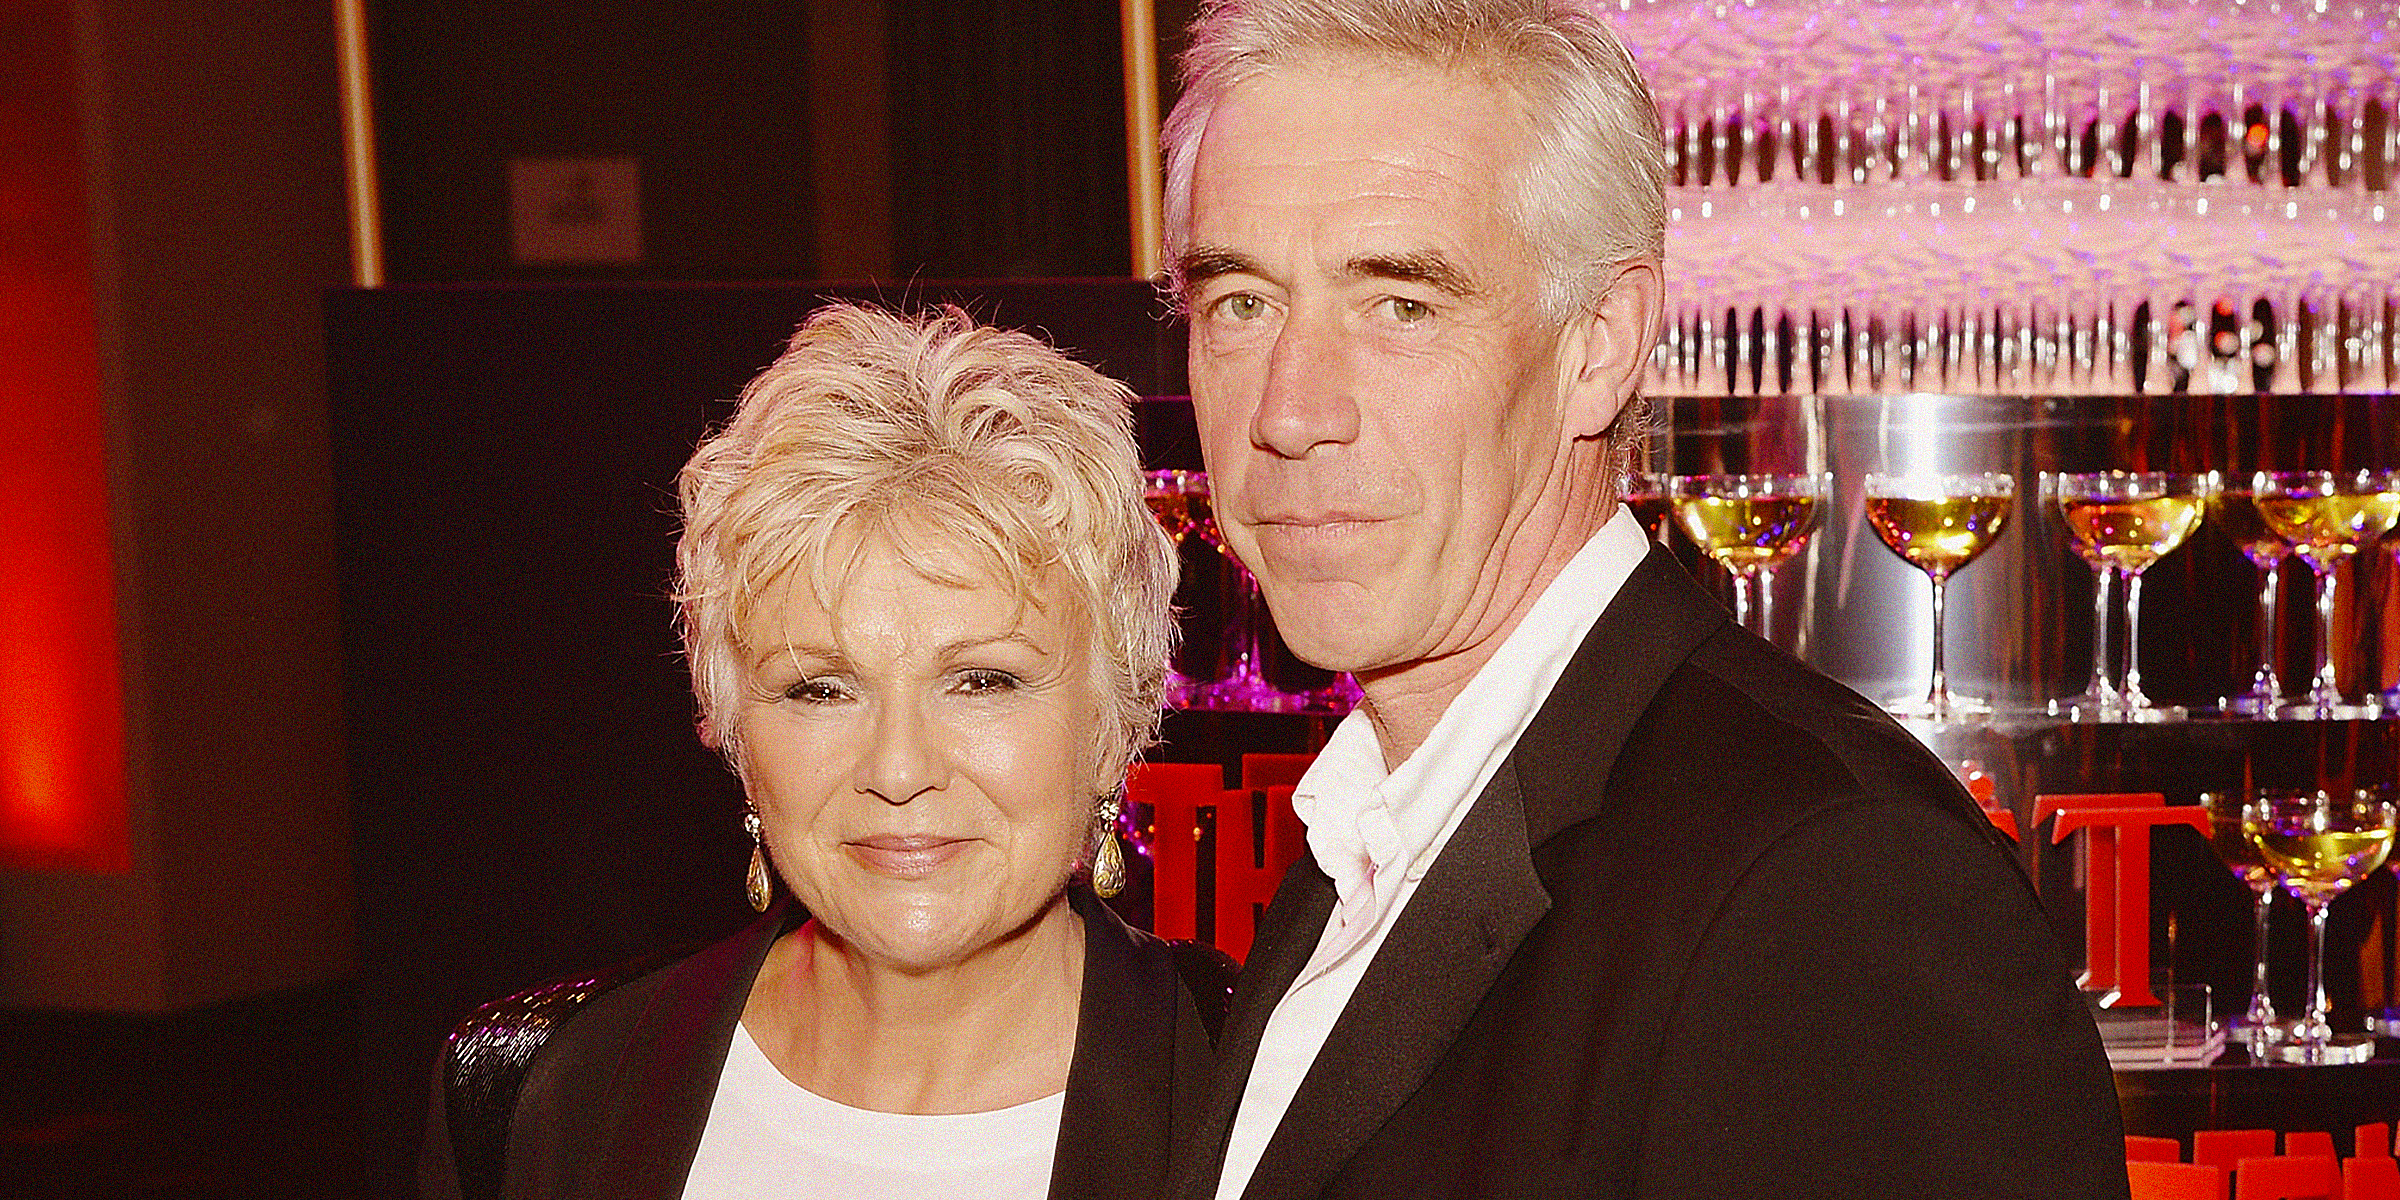 Dame Julie Walters et Grant Roffey. | Source : Getty Images